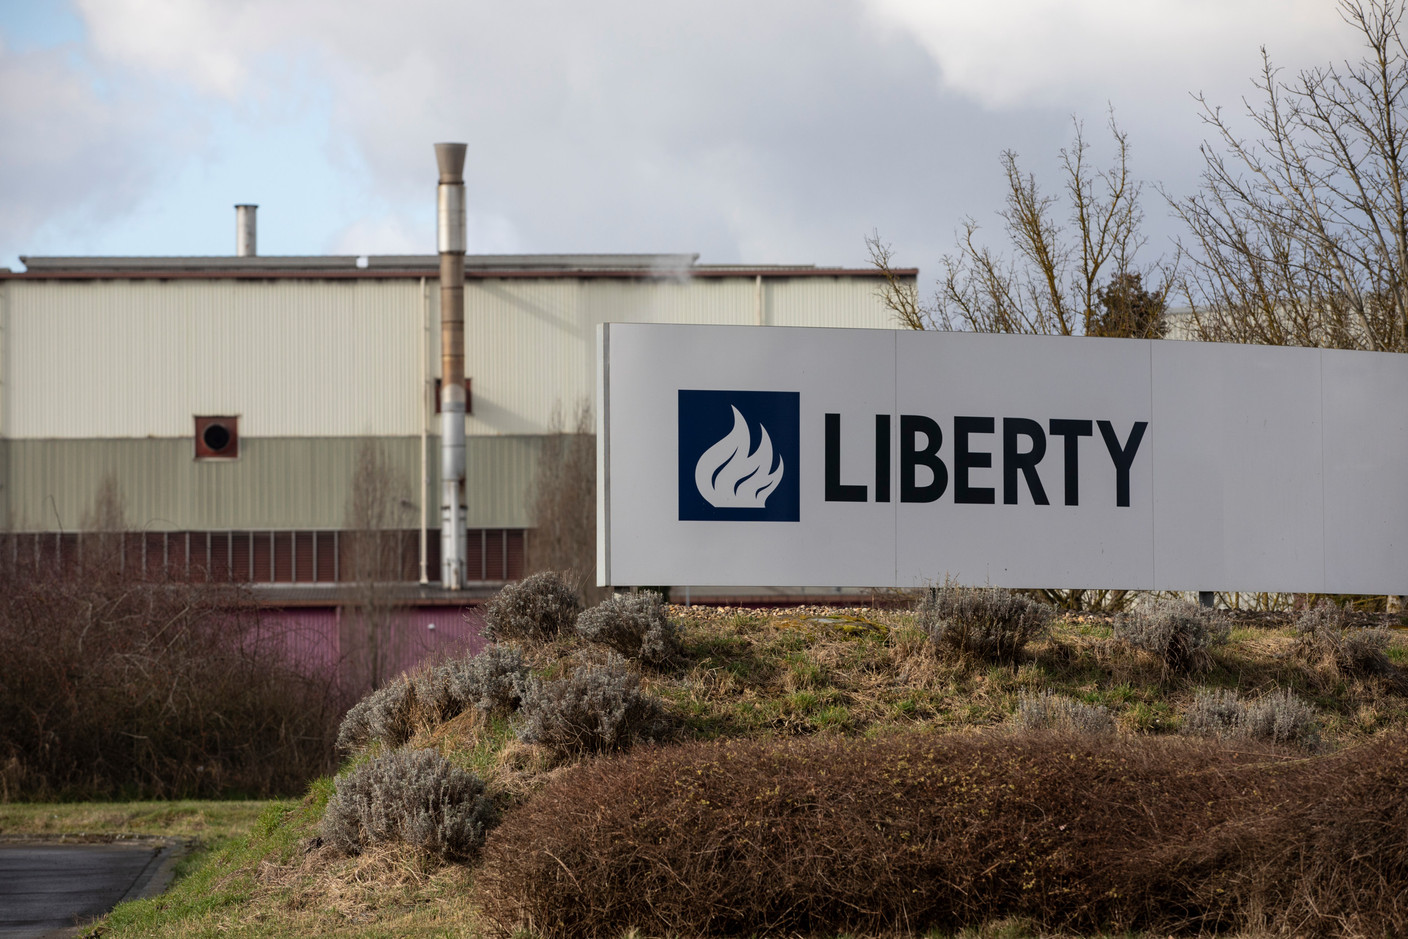 The Wallonia rescue plan for Liberty Steel concerns its activities in Liège. At the same time, the steel company employs 170 people in Luxembourg, whose future remains uncertain. Archive photo: Guy Wolff / Maison Moderne